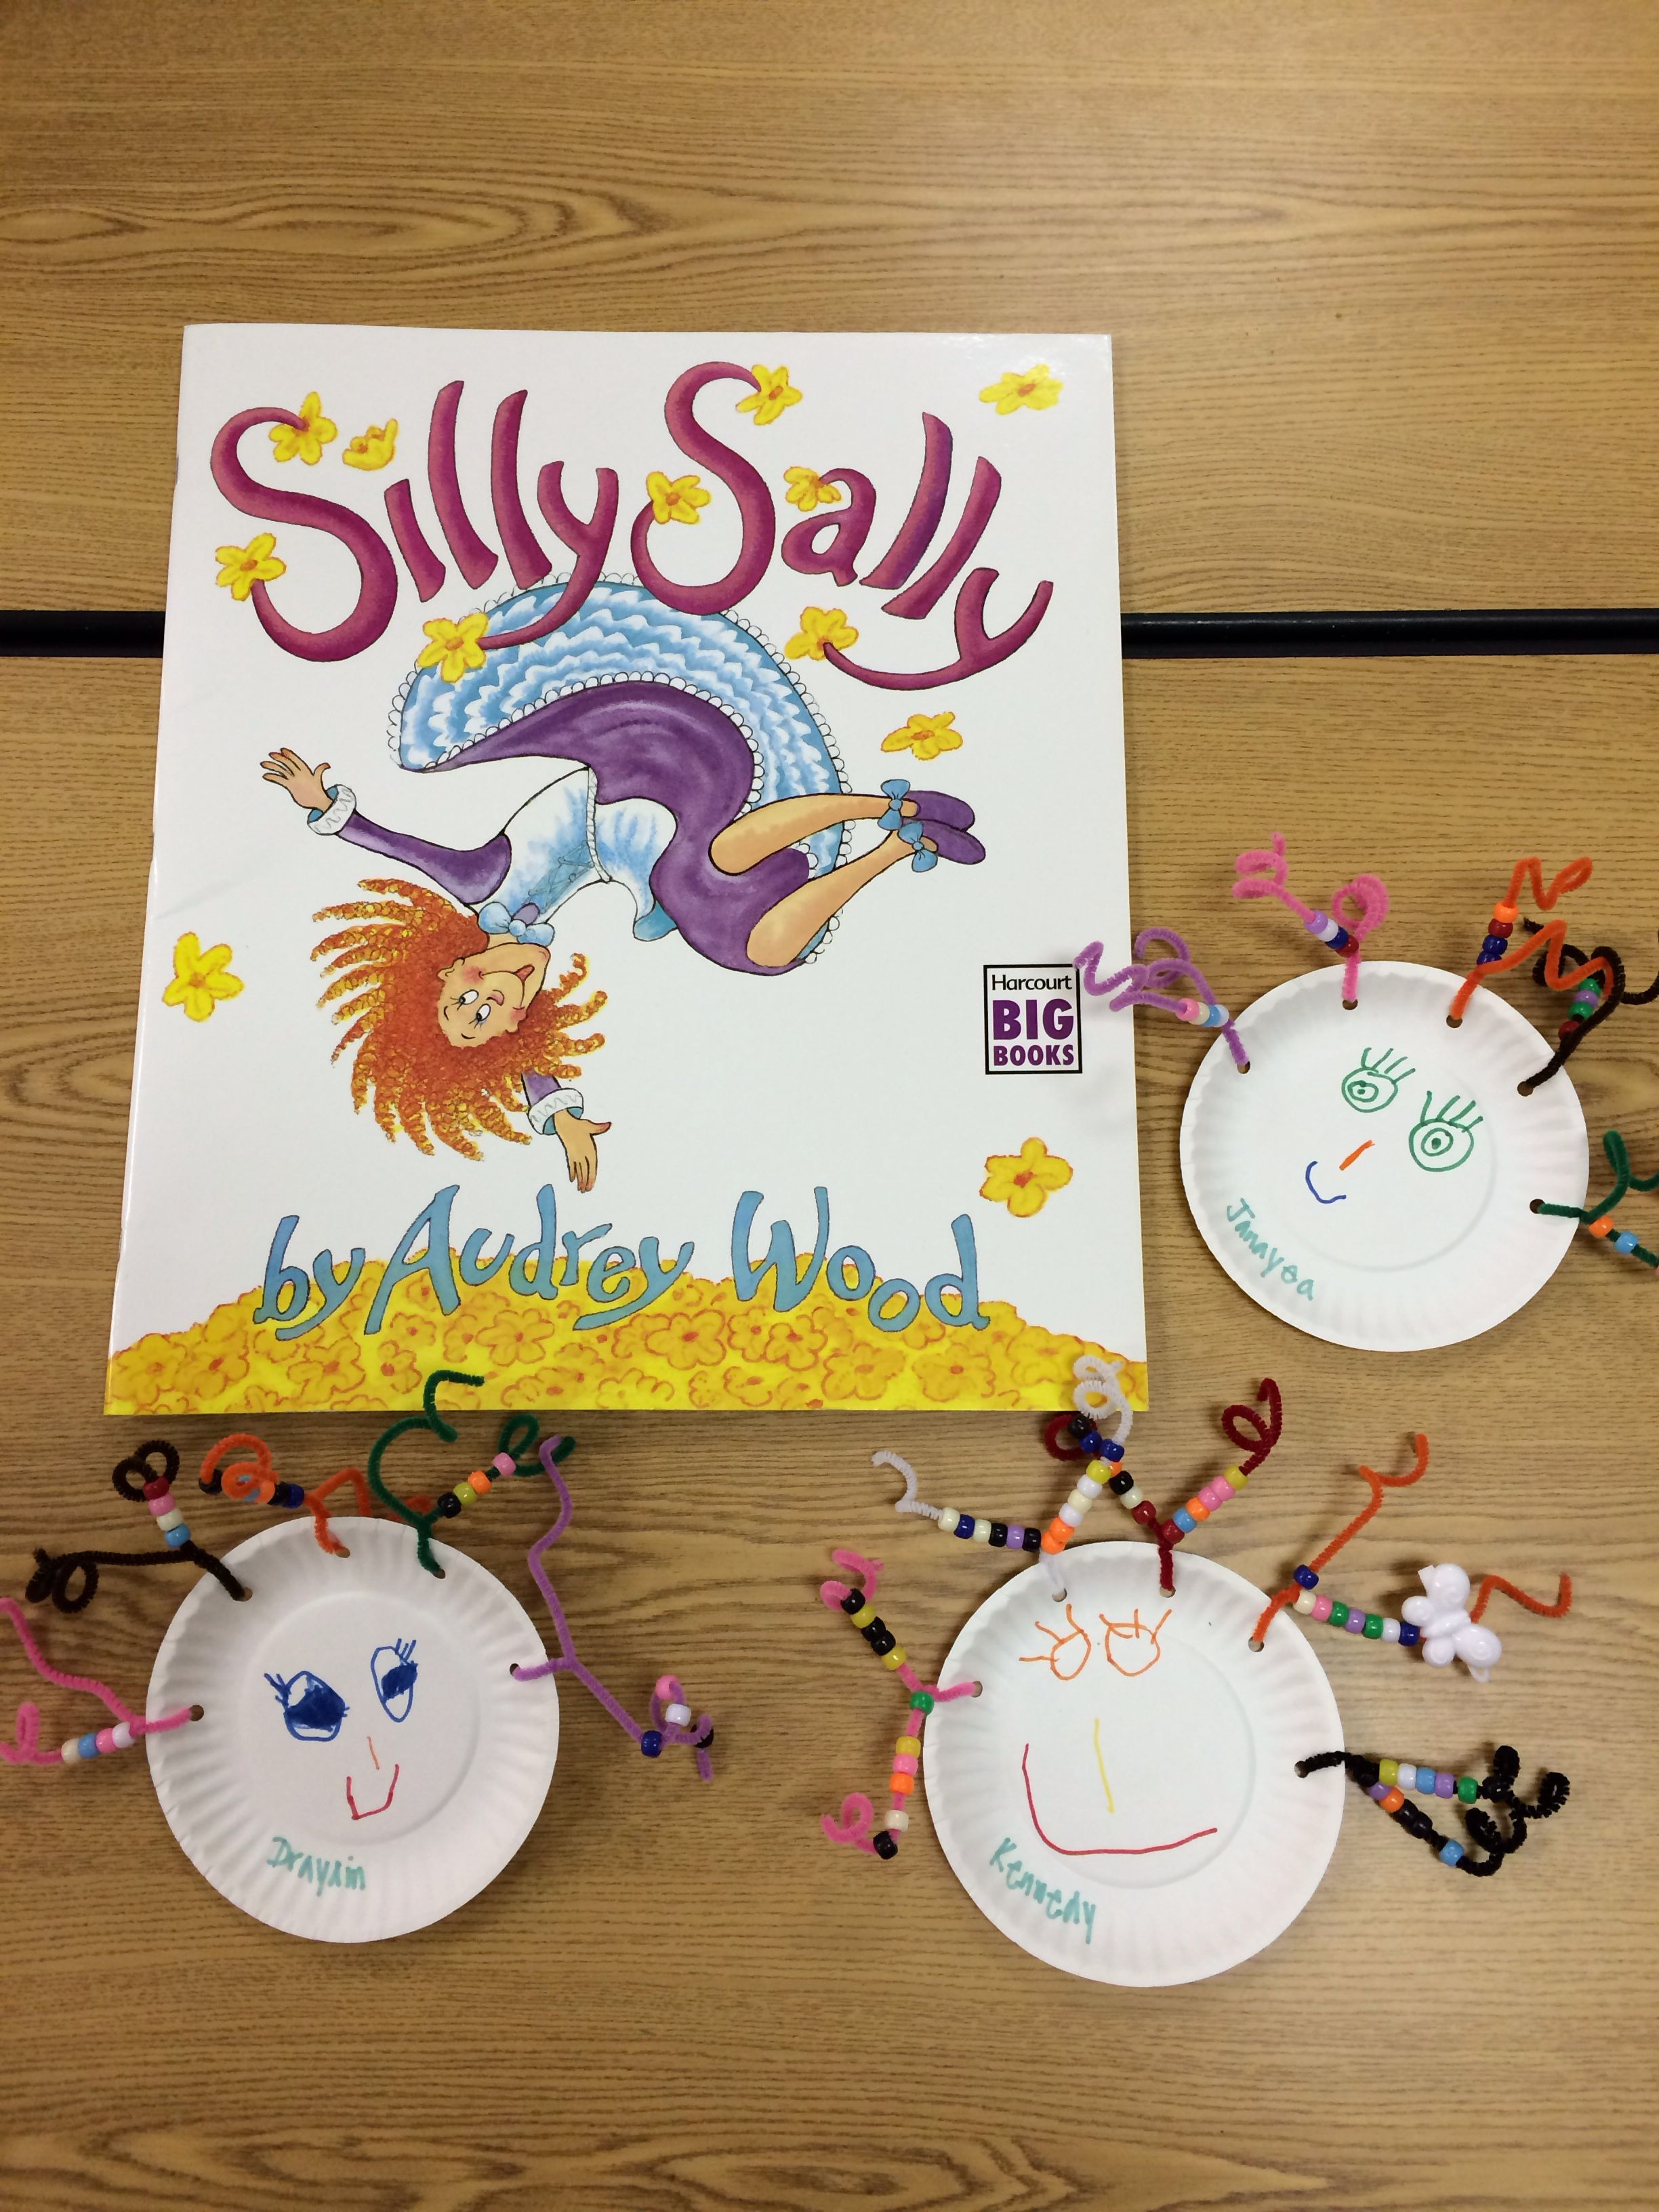 Craft Projects For Preschoolers
 Silly Sally preschool art project 3 s class